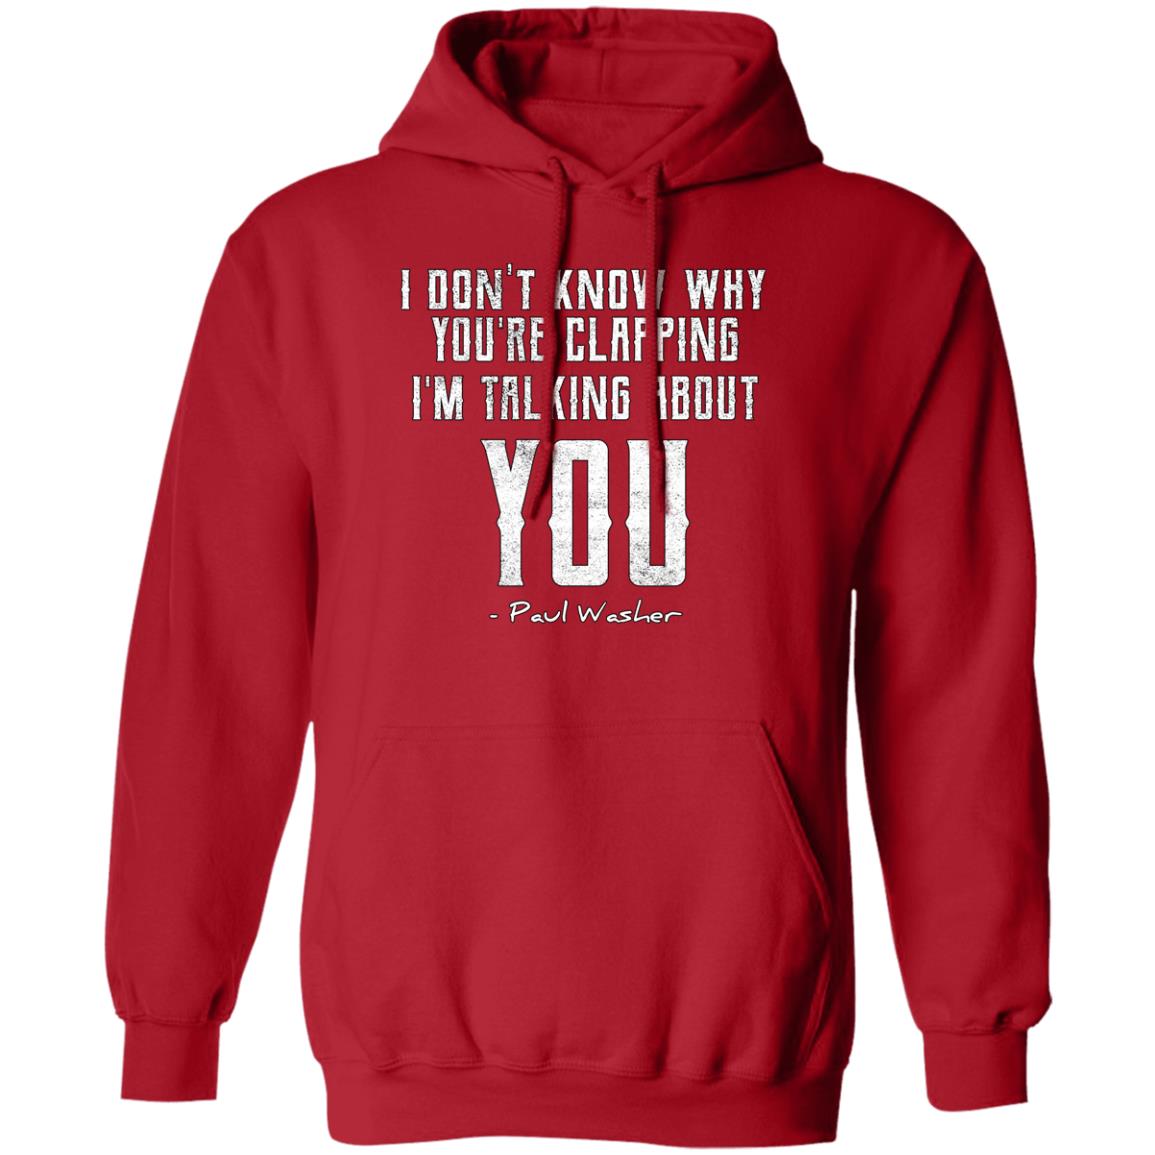 I Don't Know Why You're Clapping (Unisex Hoodie)